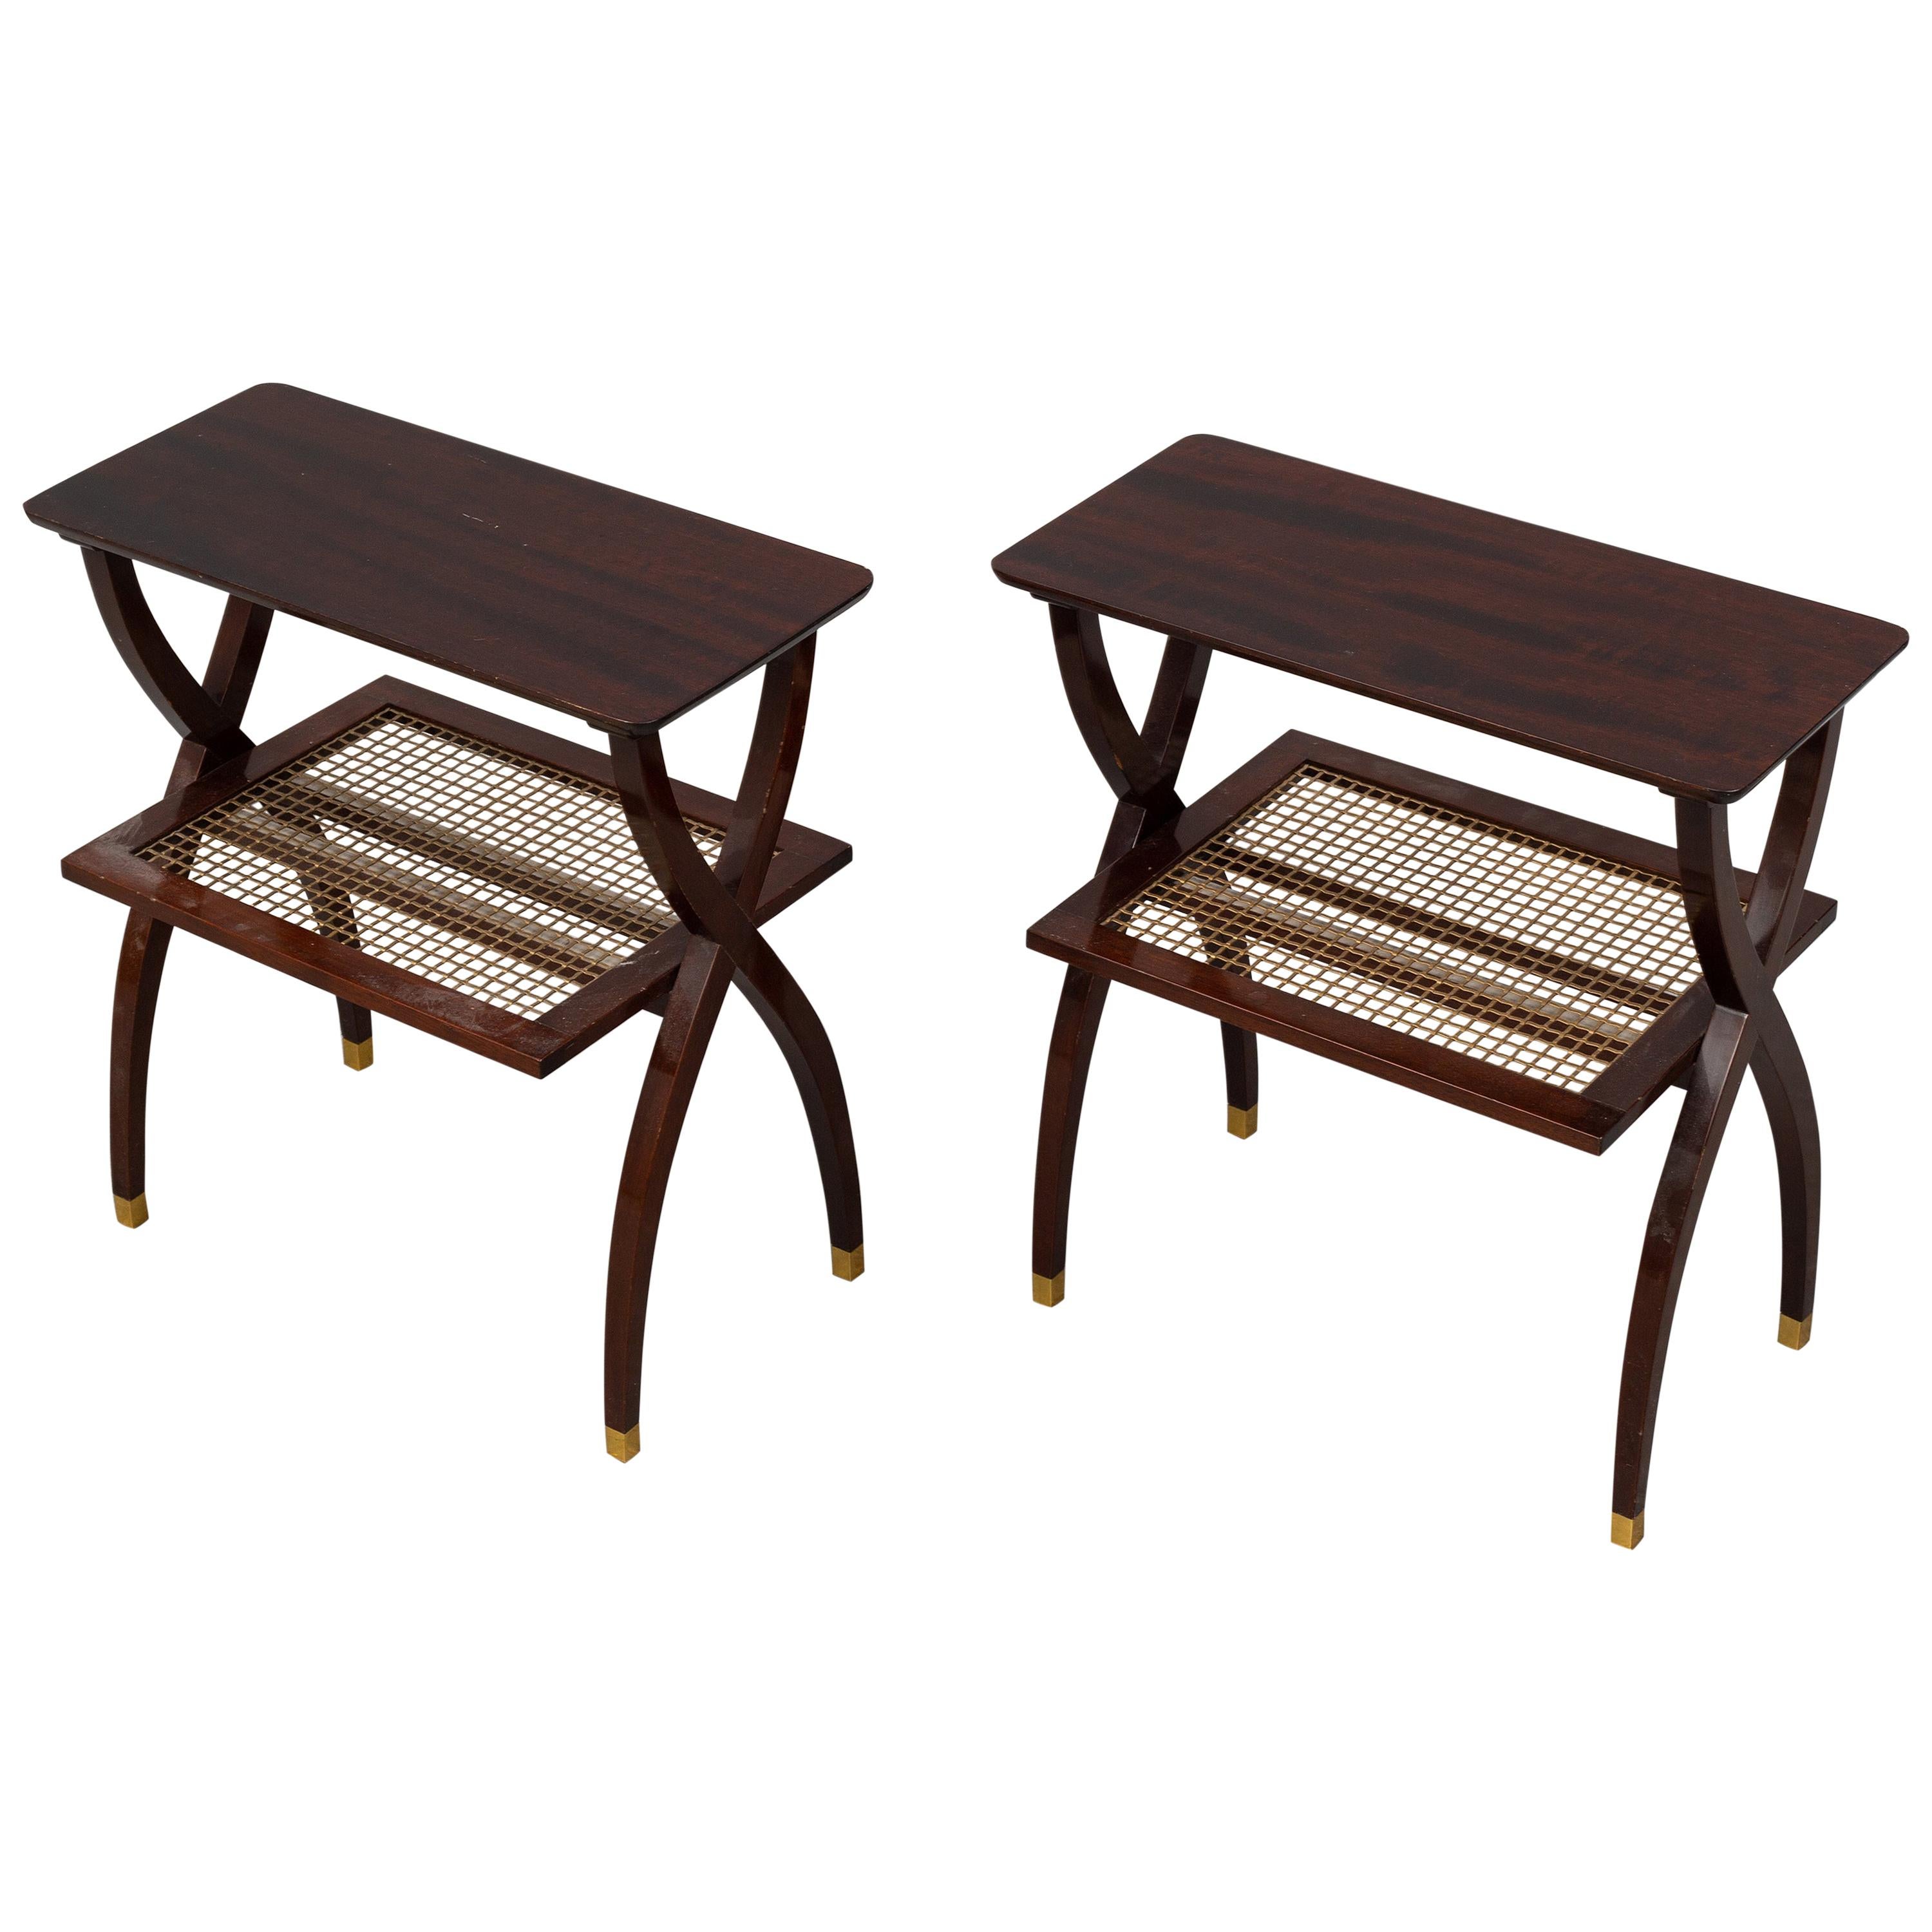 Pair of Midcentury Wood and Brass Tables